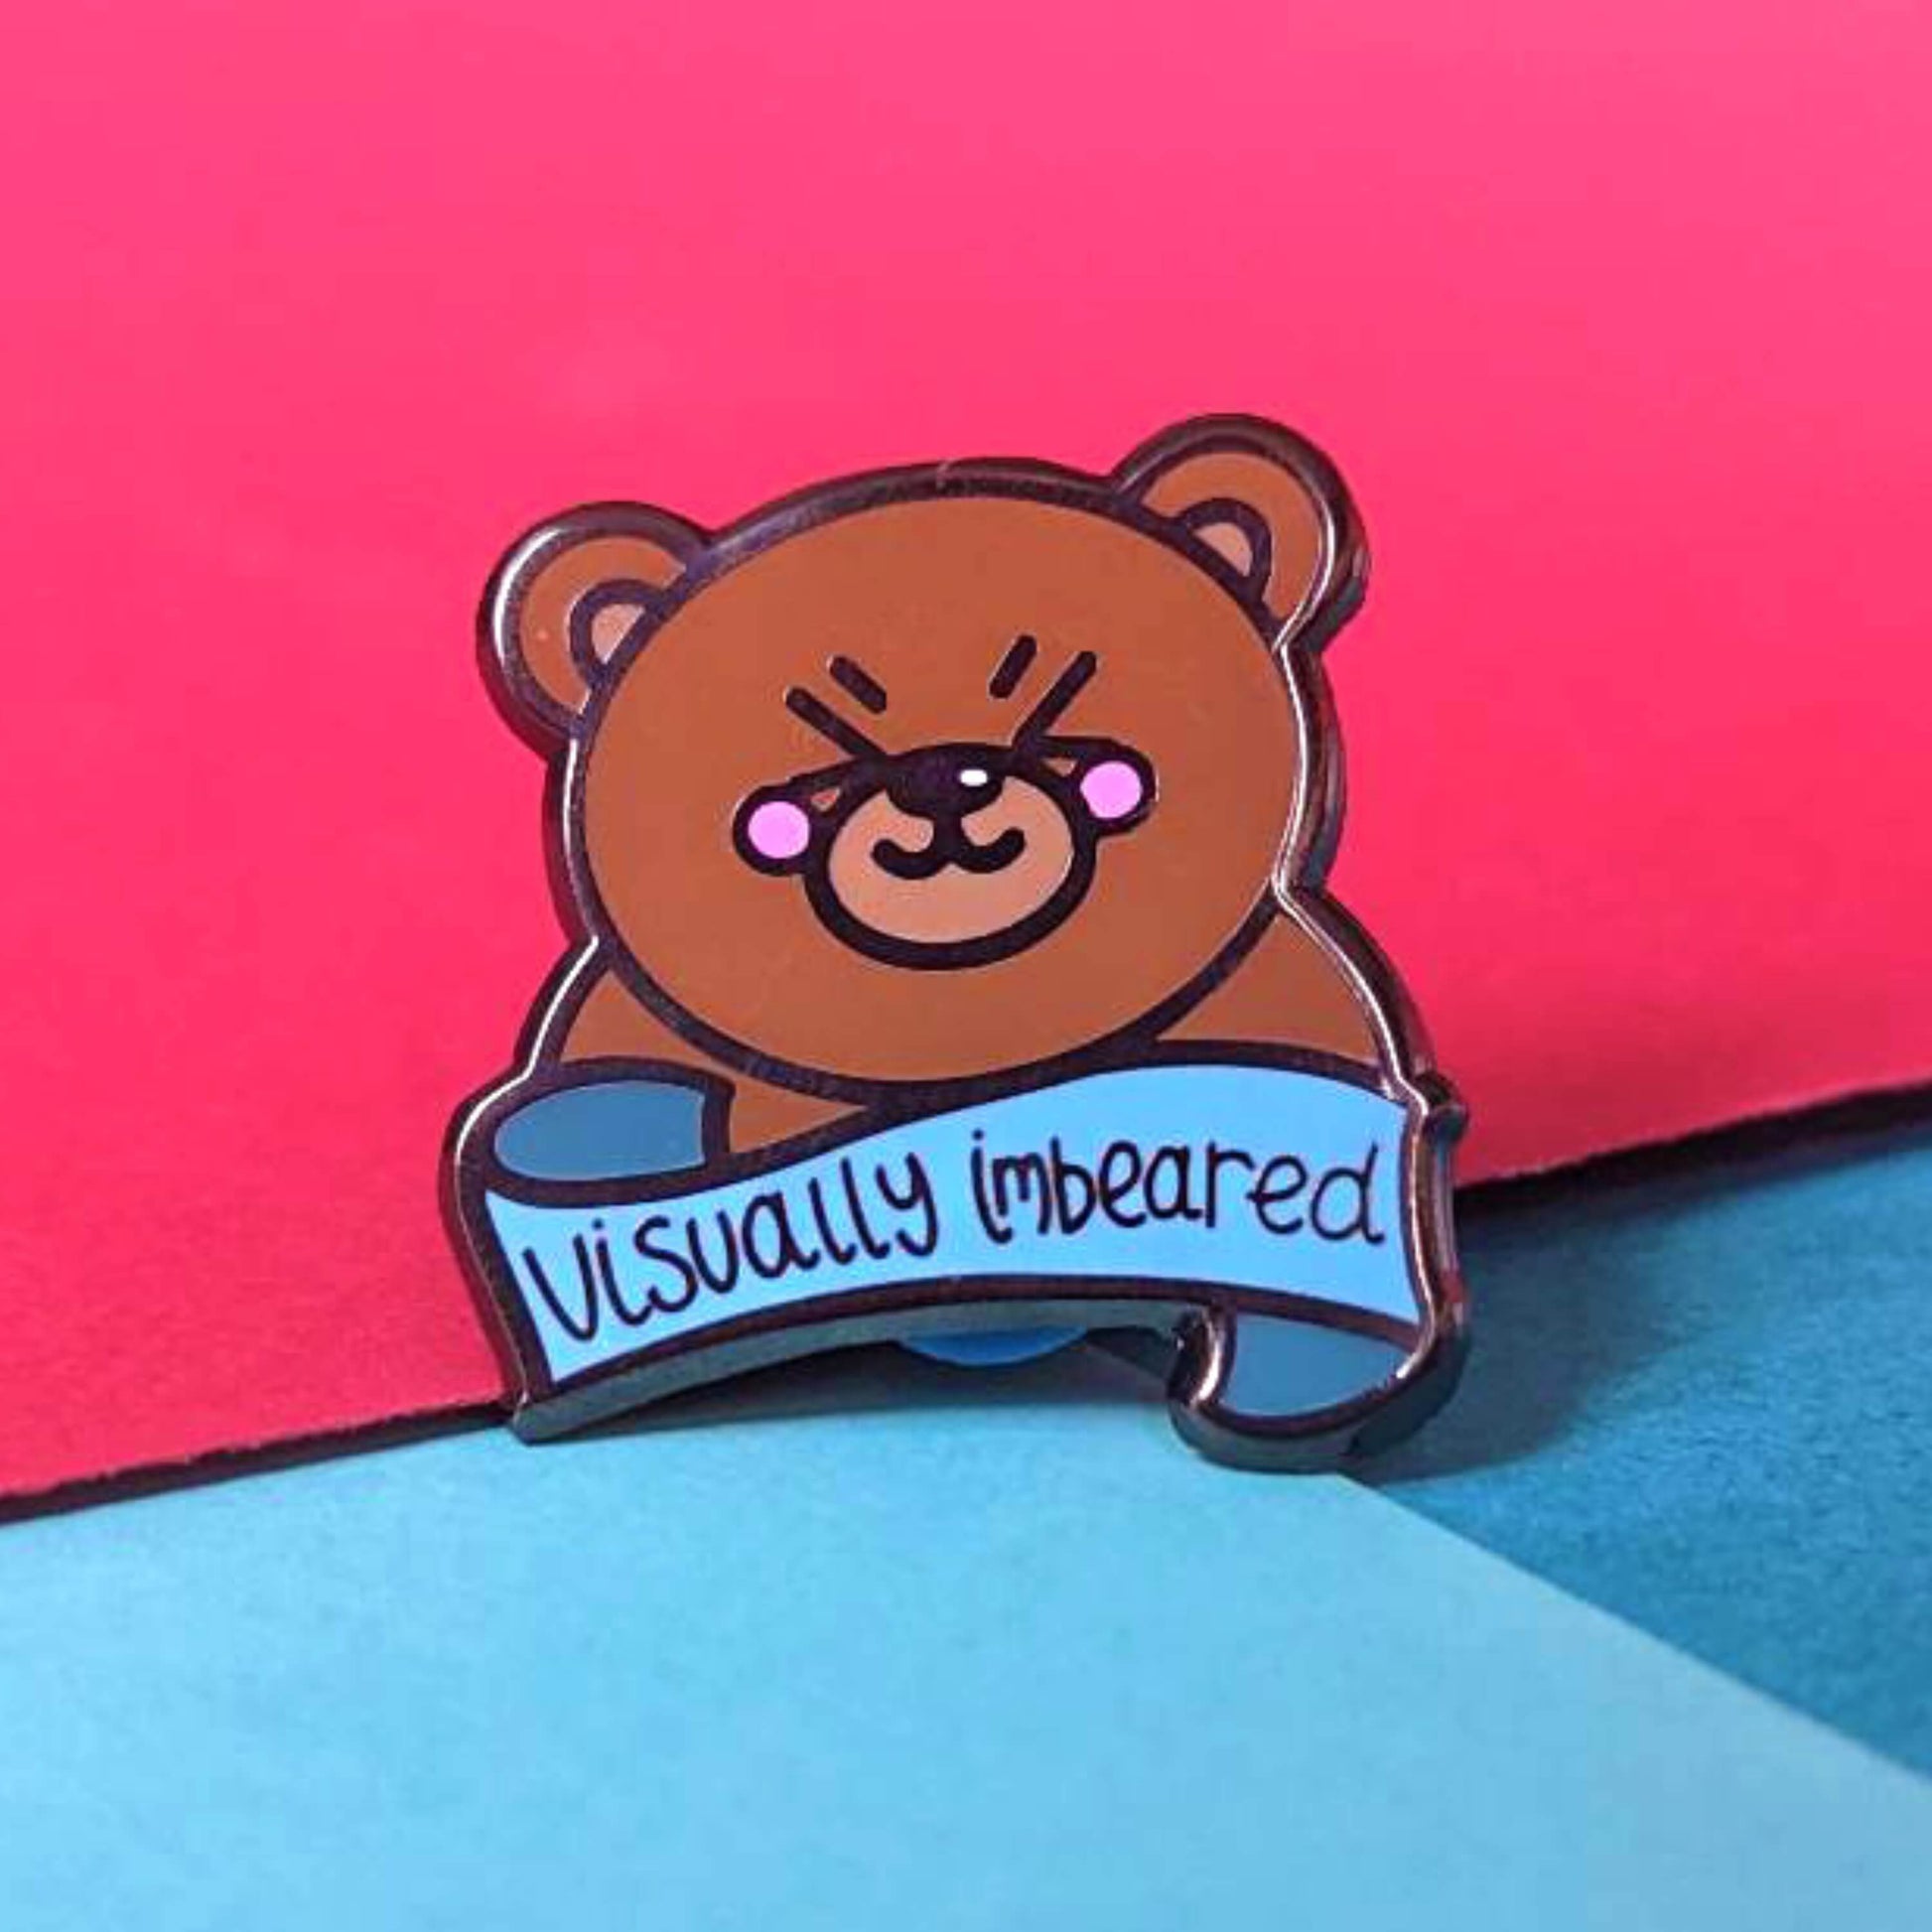 The Visually Imbeared Bear Enamel Pin - Visually Impaired on a red and blue background. The brown teddy bear shaped pin has its eyes scrunched shut smiling with pink cheeks, underneath is a blue banner with black text reading 'visually imbeared'. The hand drawn design is raising awareness for visual impairment and blindness.